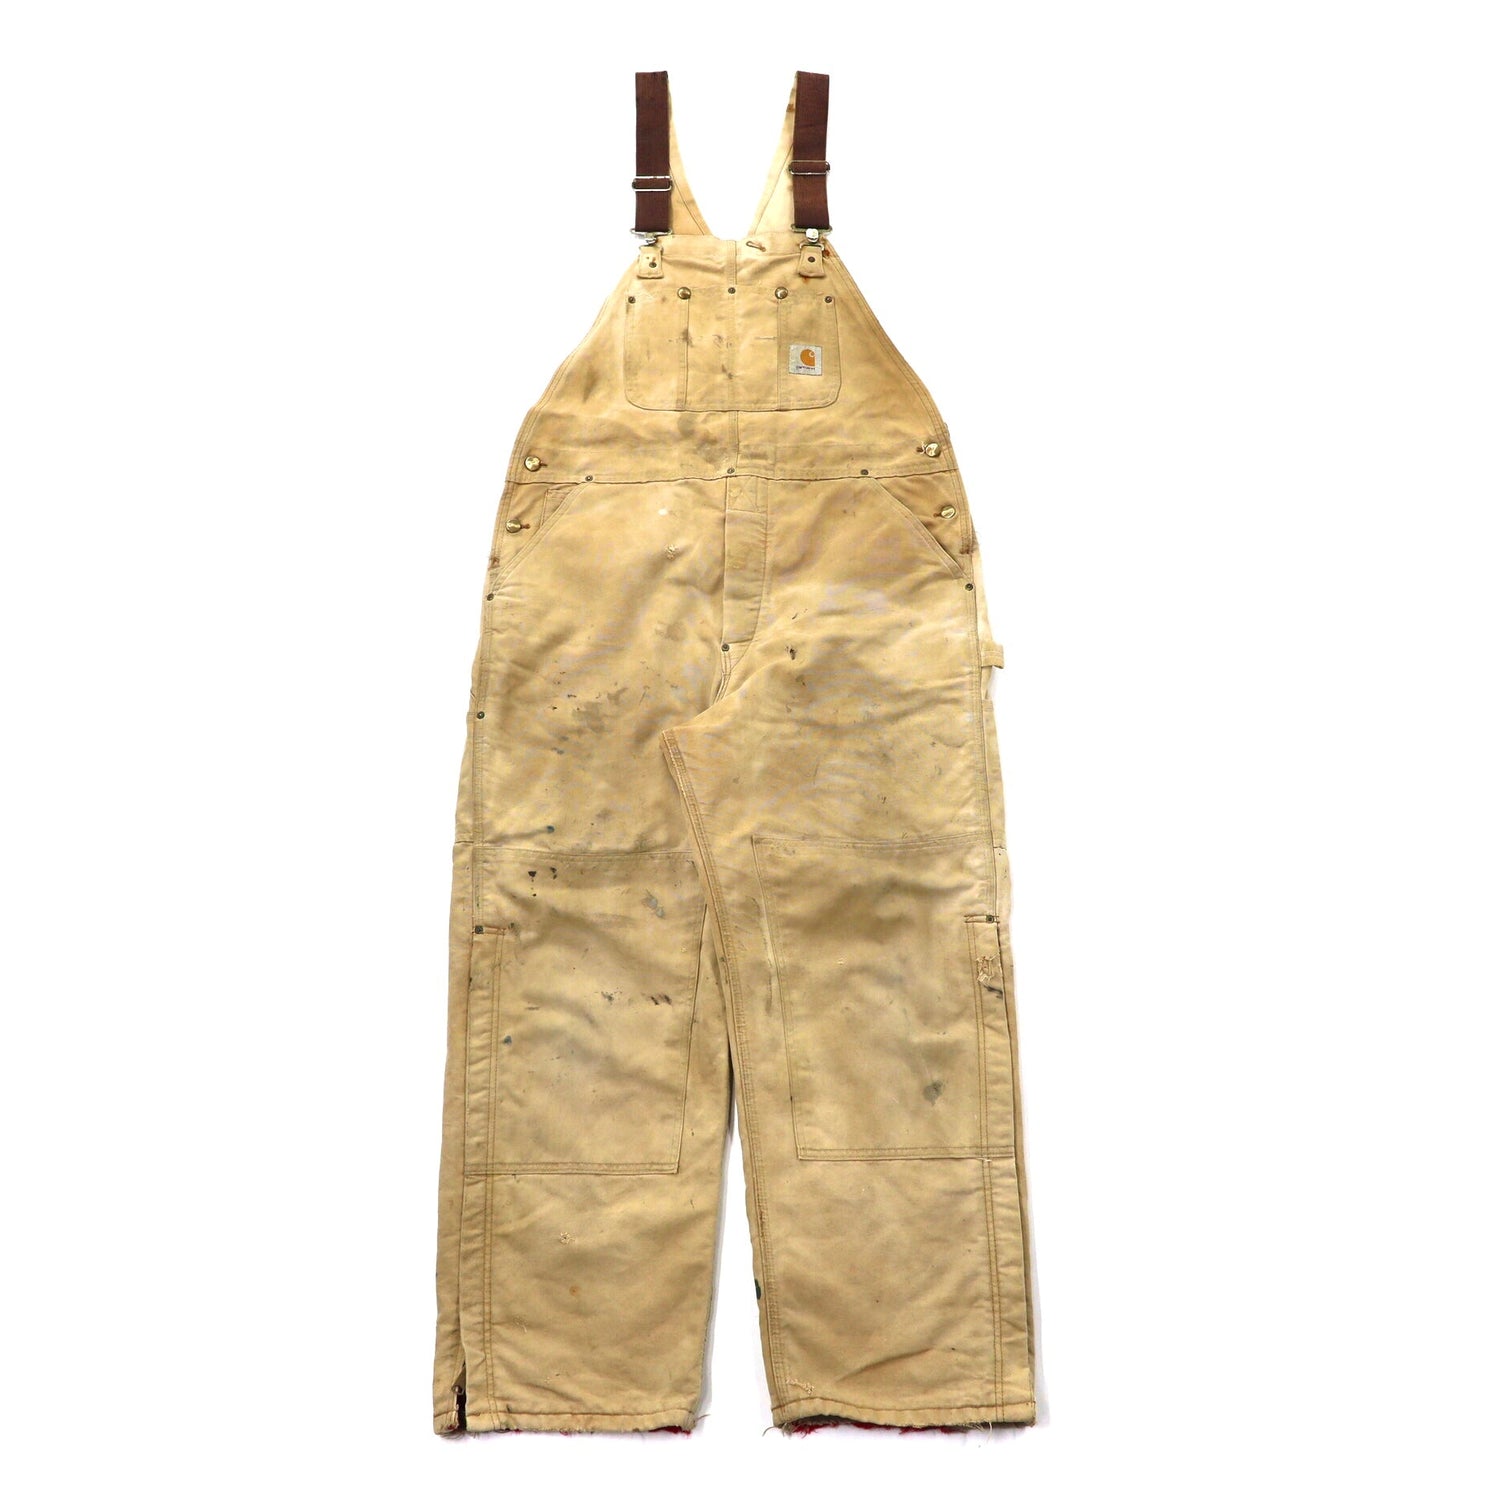 CARHARTT Double knee Overall 40 Beige Duck Star Tag 80s USA